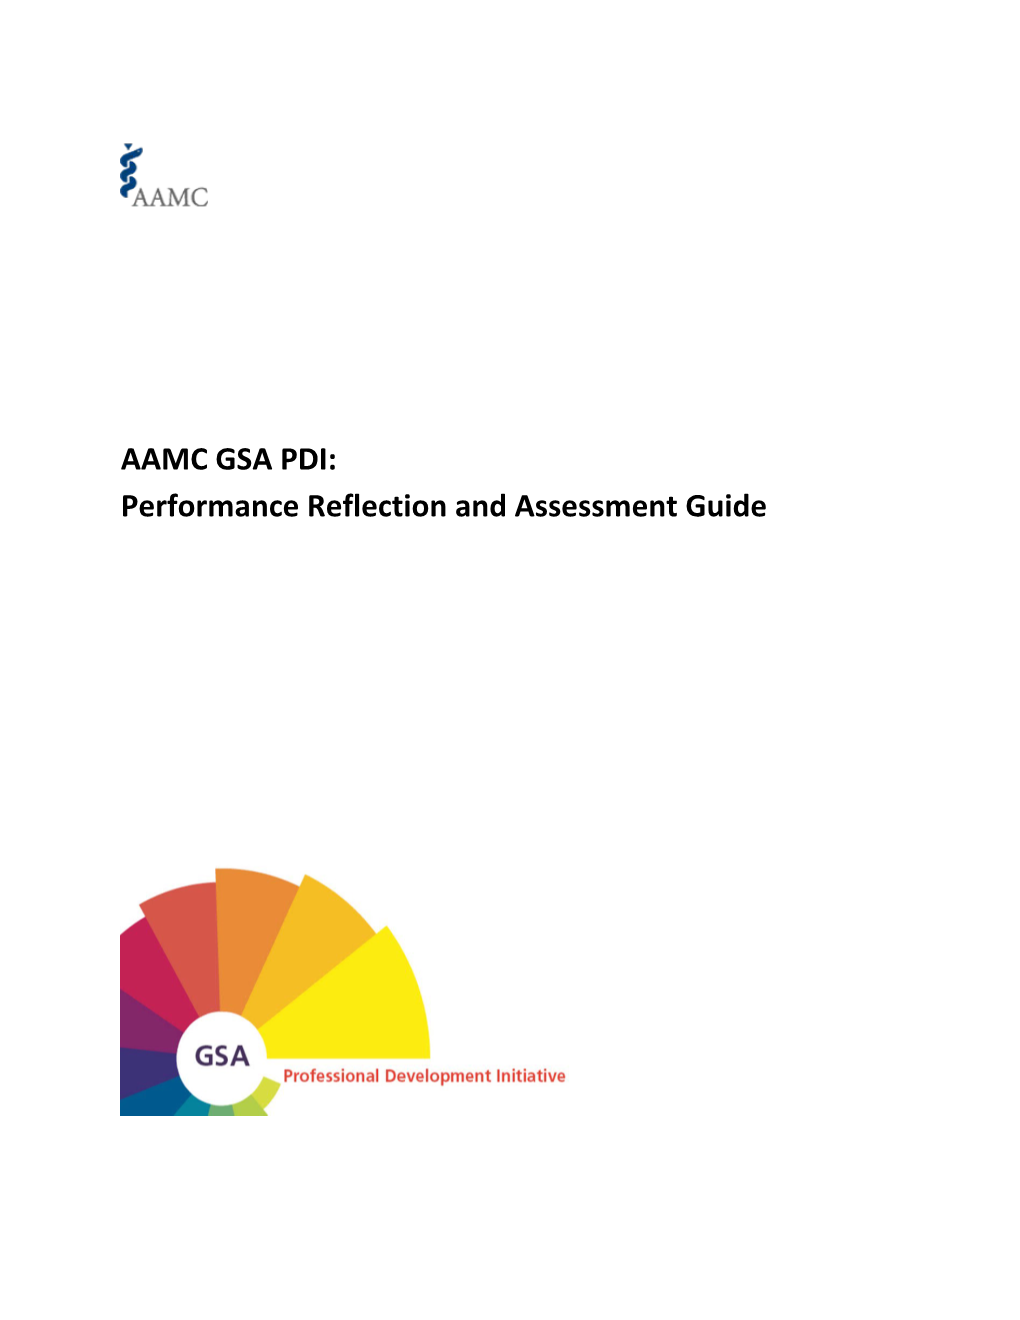 AAMC GSA PDI: Performance Reflection and Assessment Guide